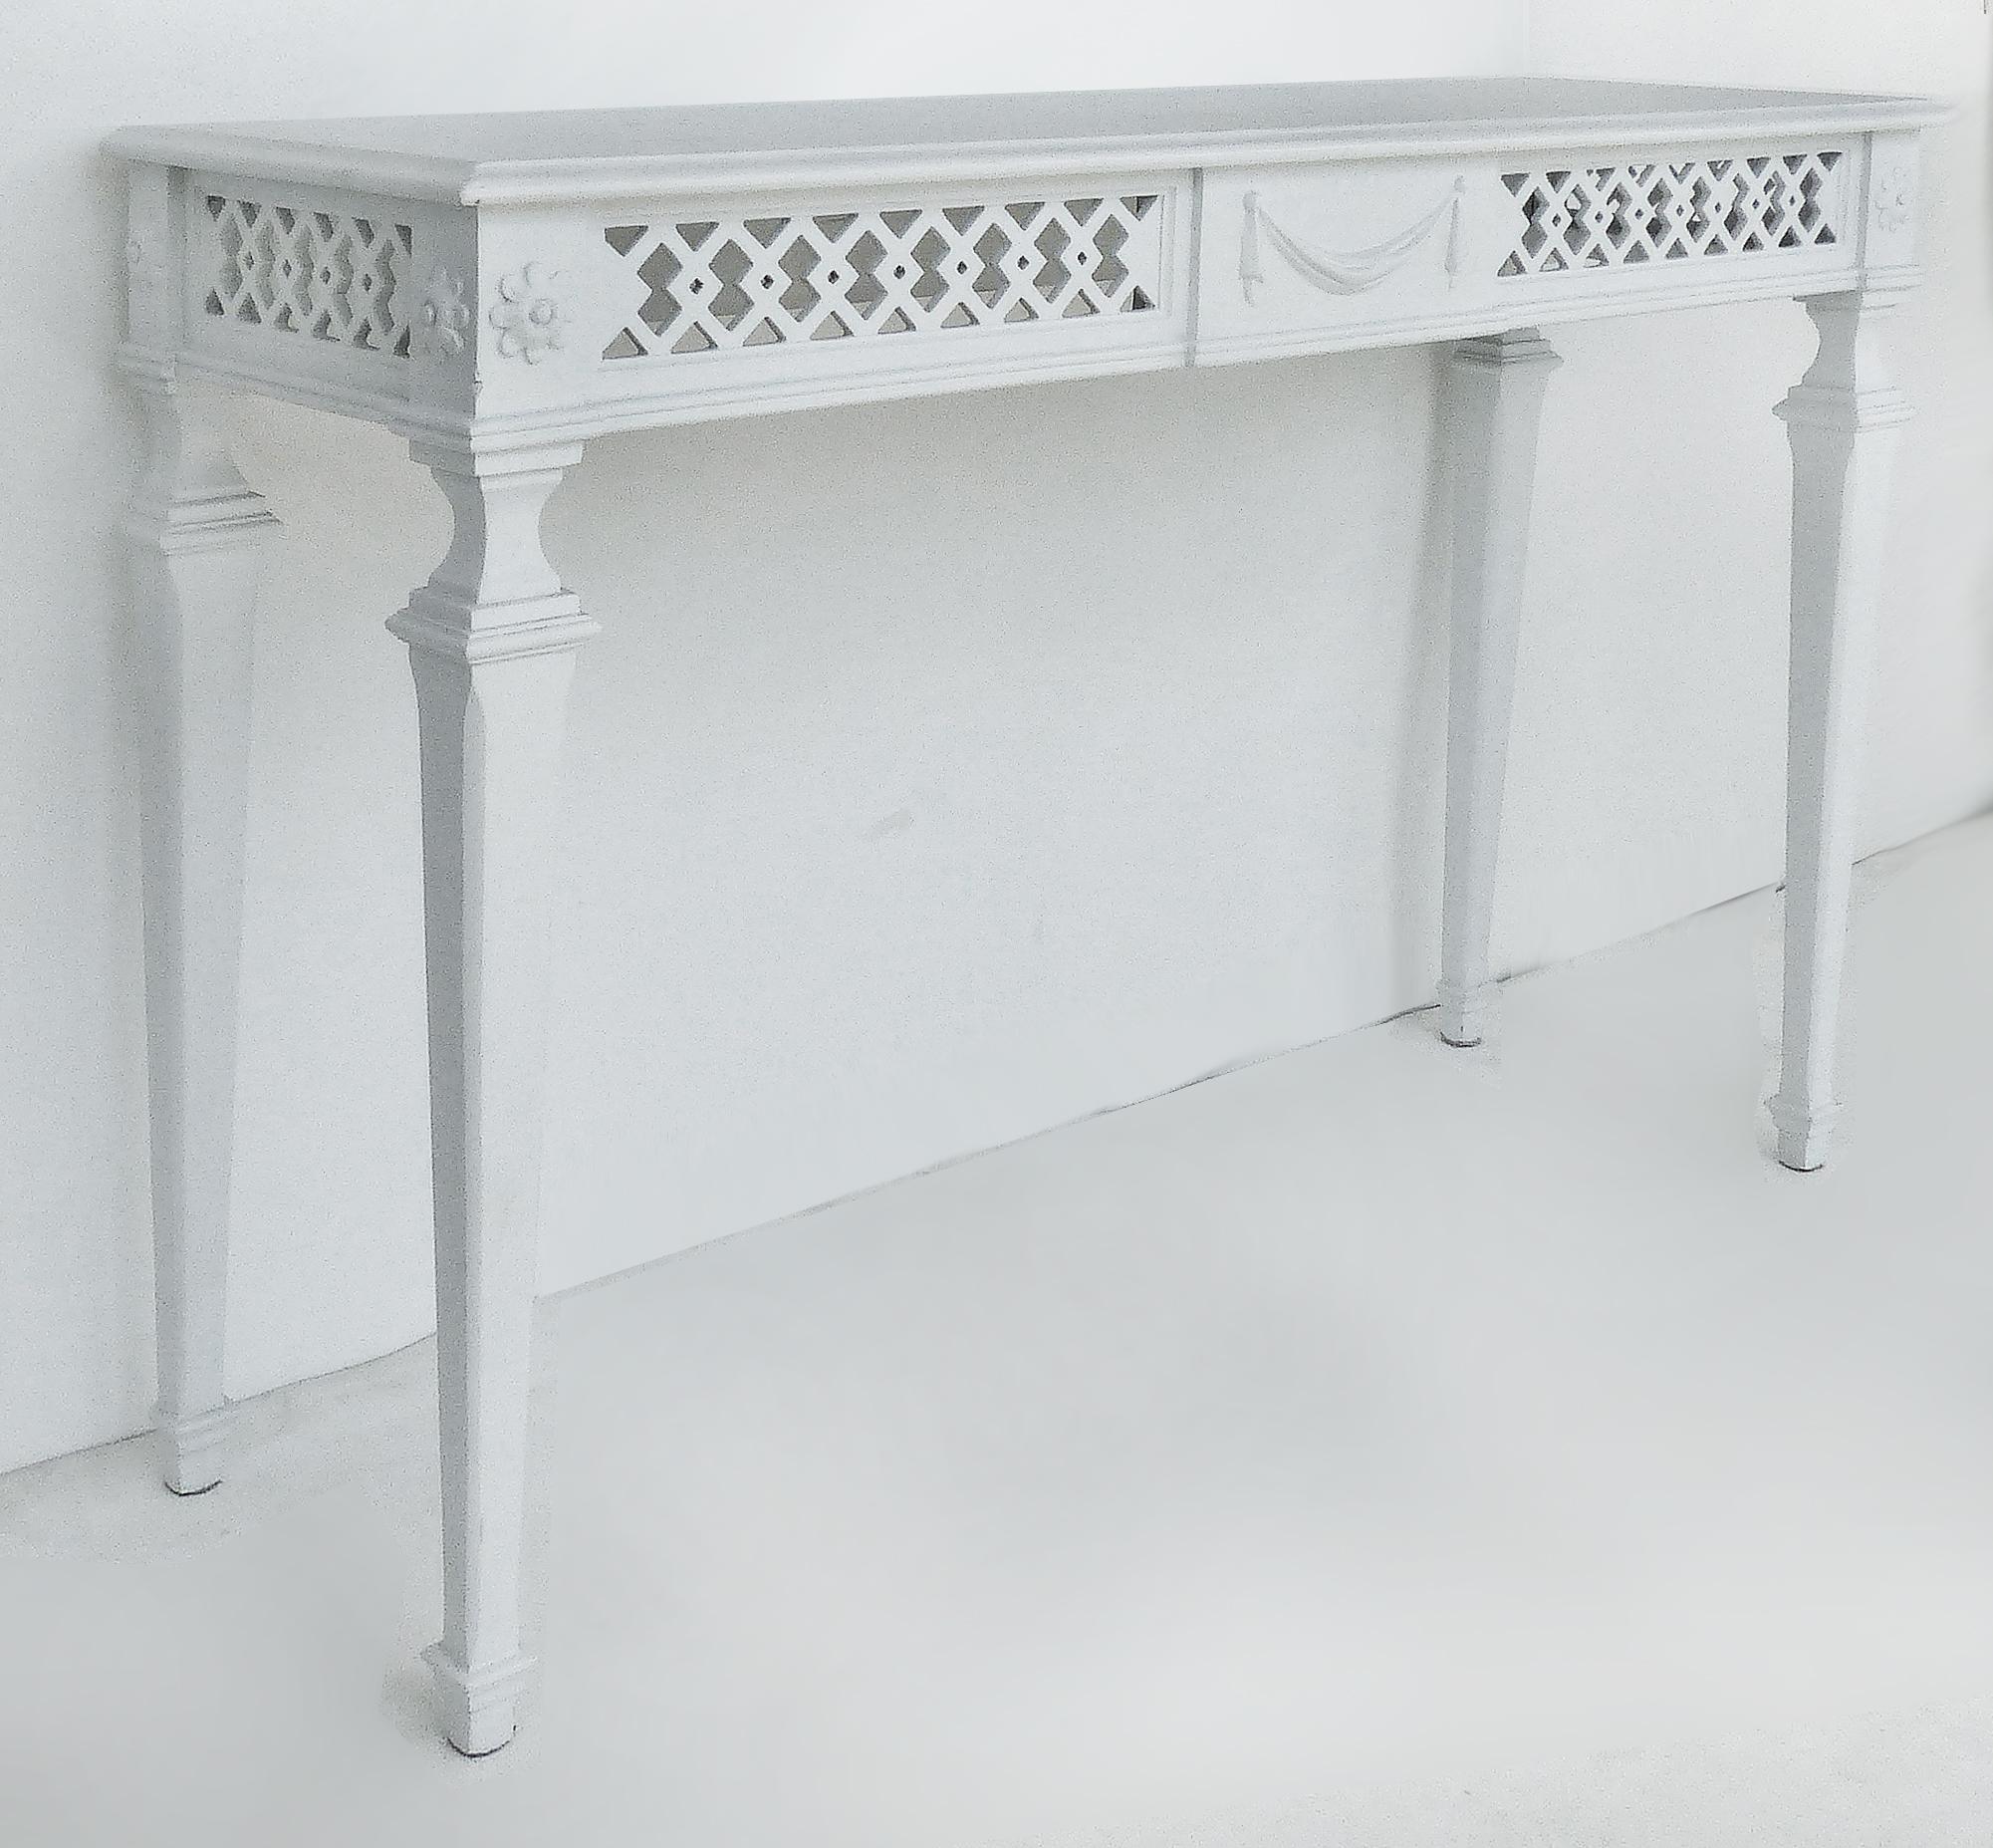 Vintage Italian lacquered carved consoles tables with carved reticulated aprons.


Offered for sale is a pair of vintage Italian white lacquered console tables with reticulated open aprons. The consoles have recently been lacquered. At the